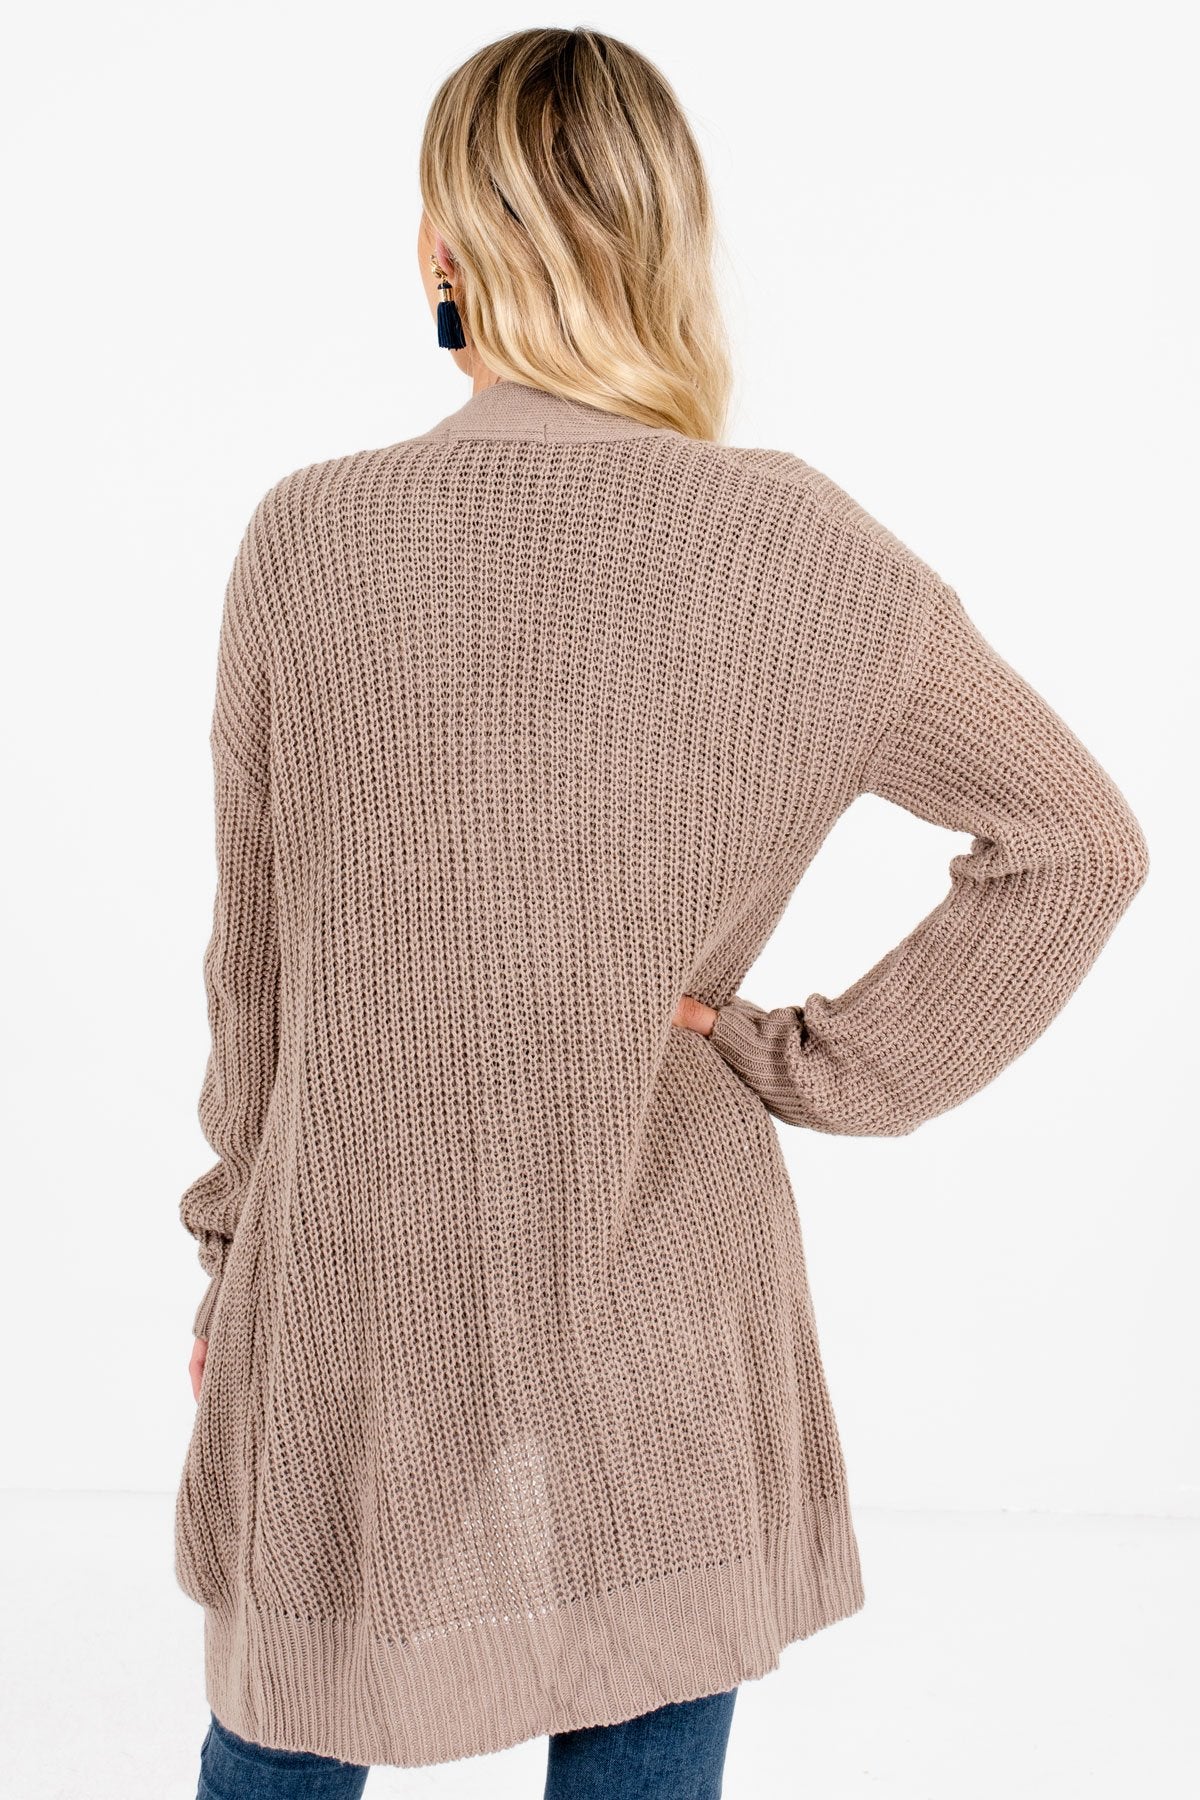 Women’s Taupe Brown Boutique Cardigans with Pockets